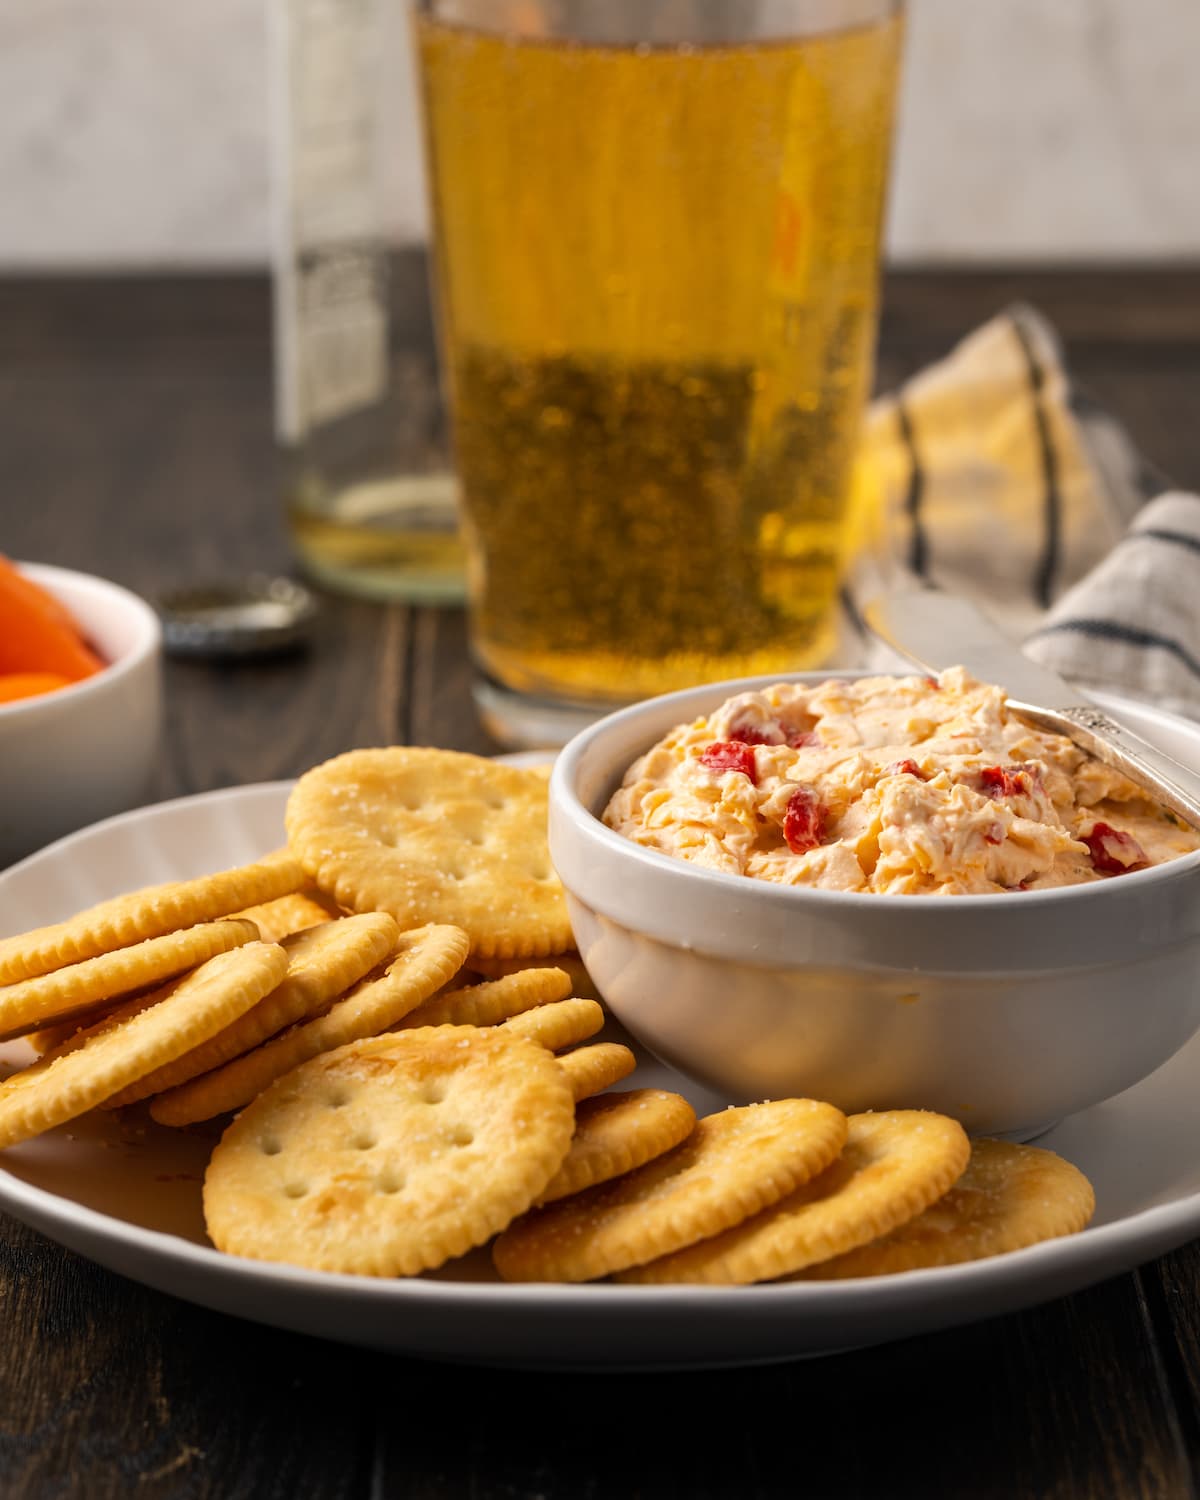 A bowl of pimento cheese served on a platter of crackers, with glasses of beer in the background.